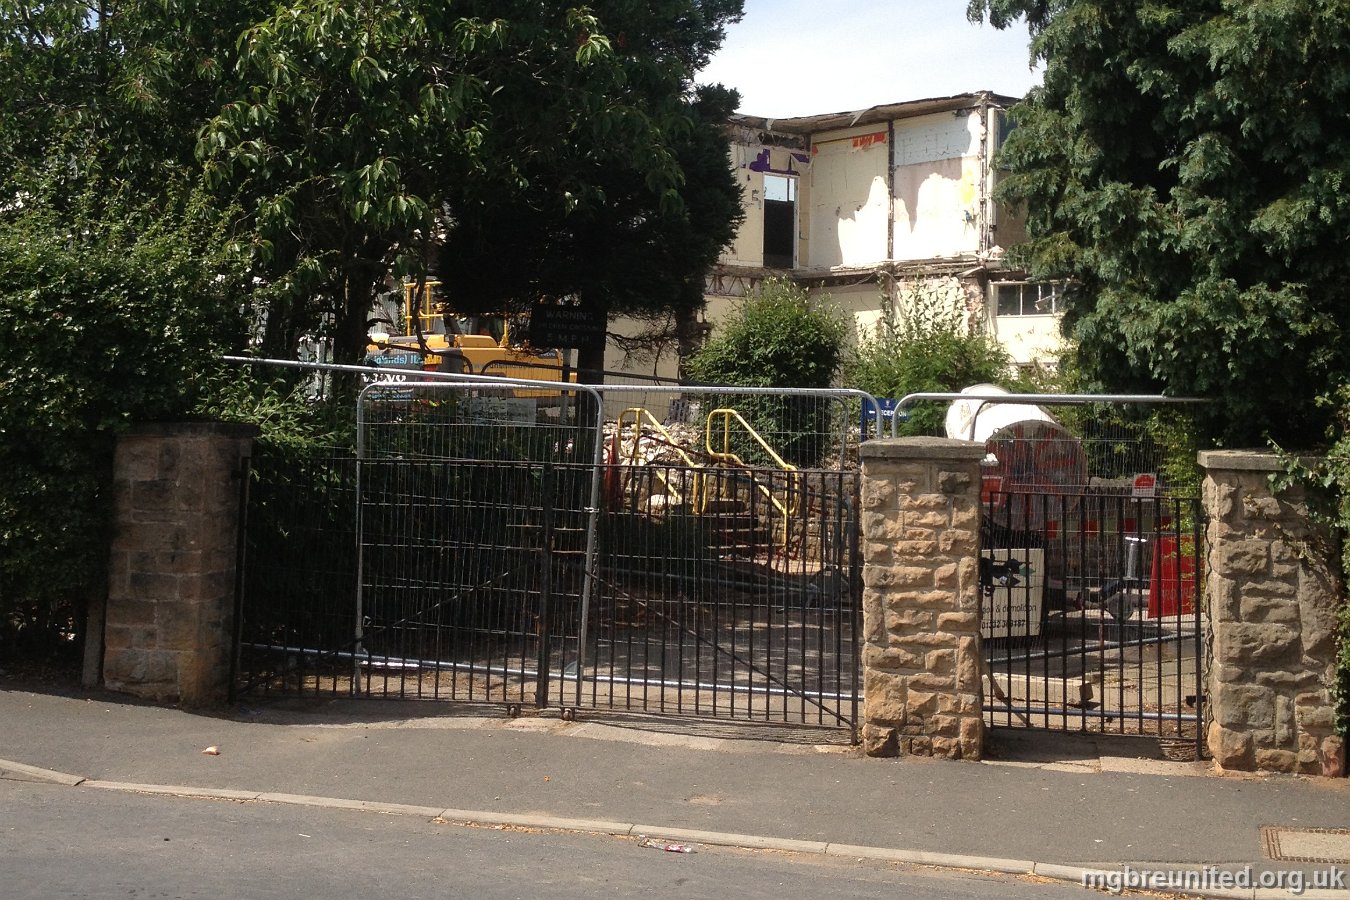 2013 Demolition of Margaret Glen-Bott School gates about the only thing that is still recognisable. Photo from Ann Gregory - taken July 2013